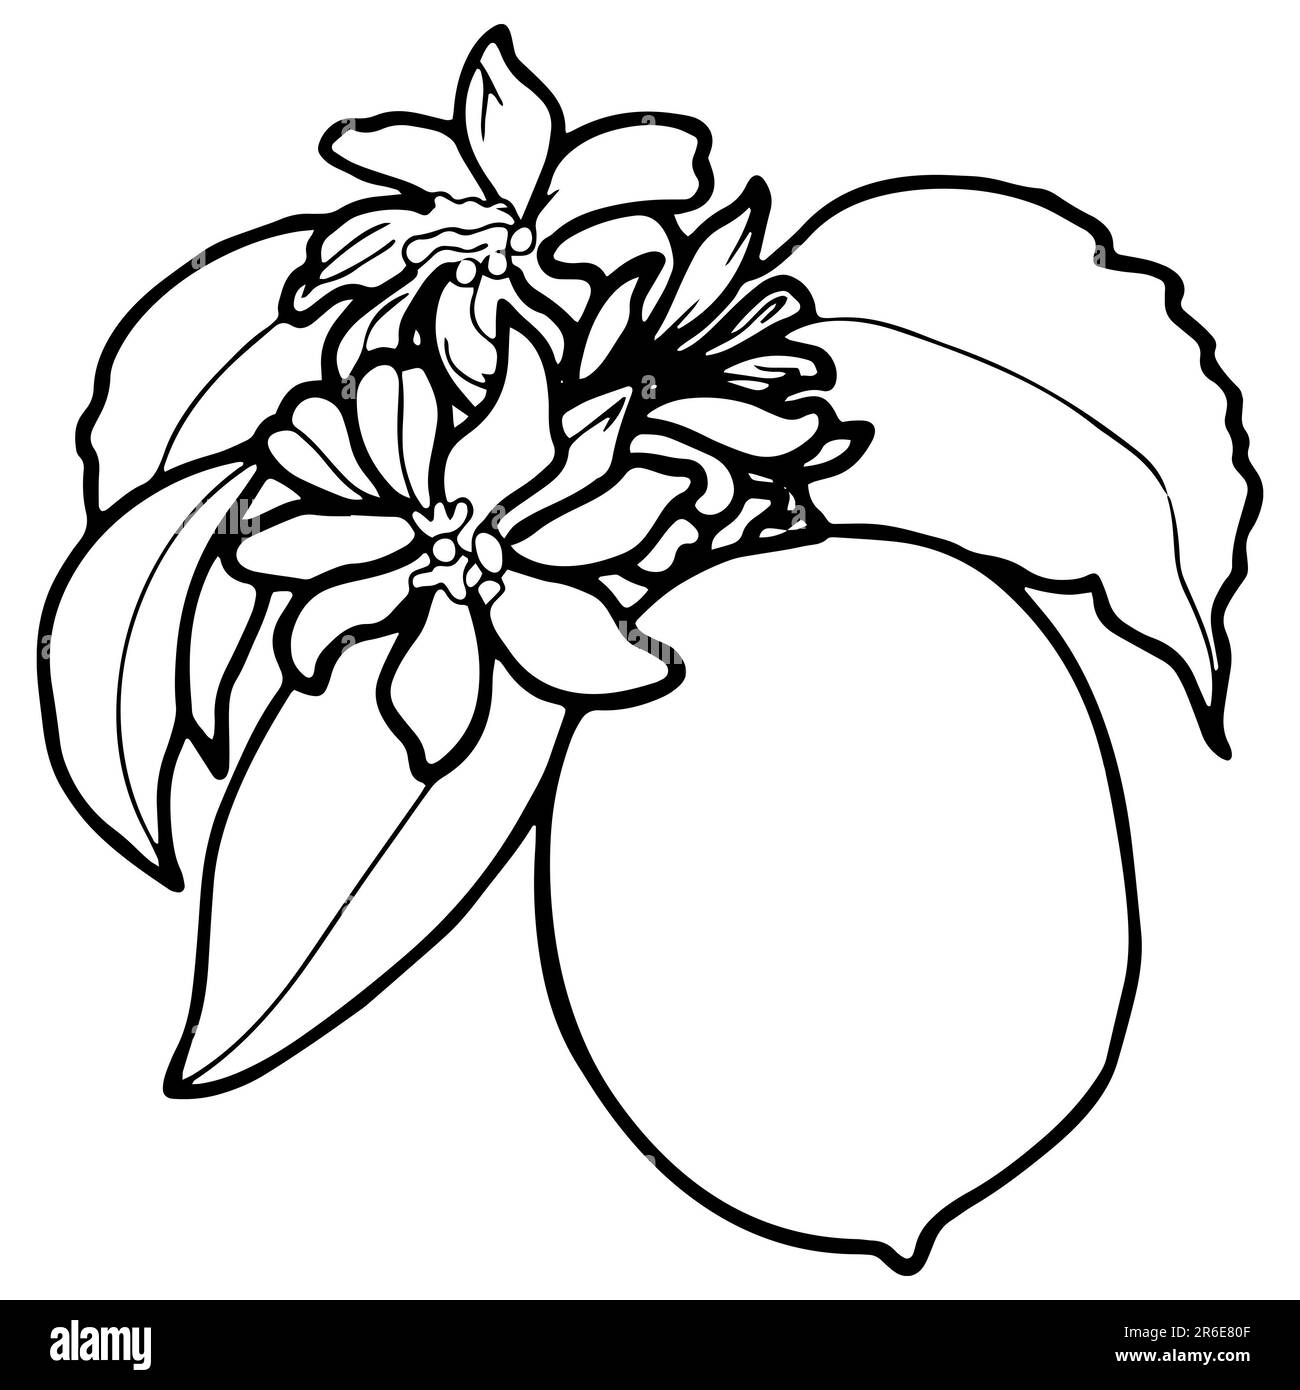 Creative Contour Outline Coloring Page Drawing on White Background Stock  Vector - Illustration of flora, contour: 253387289